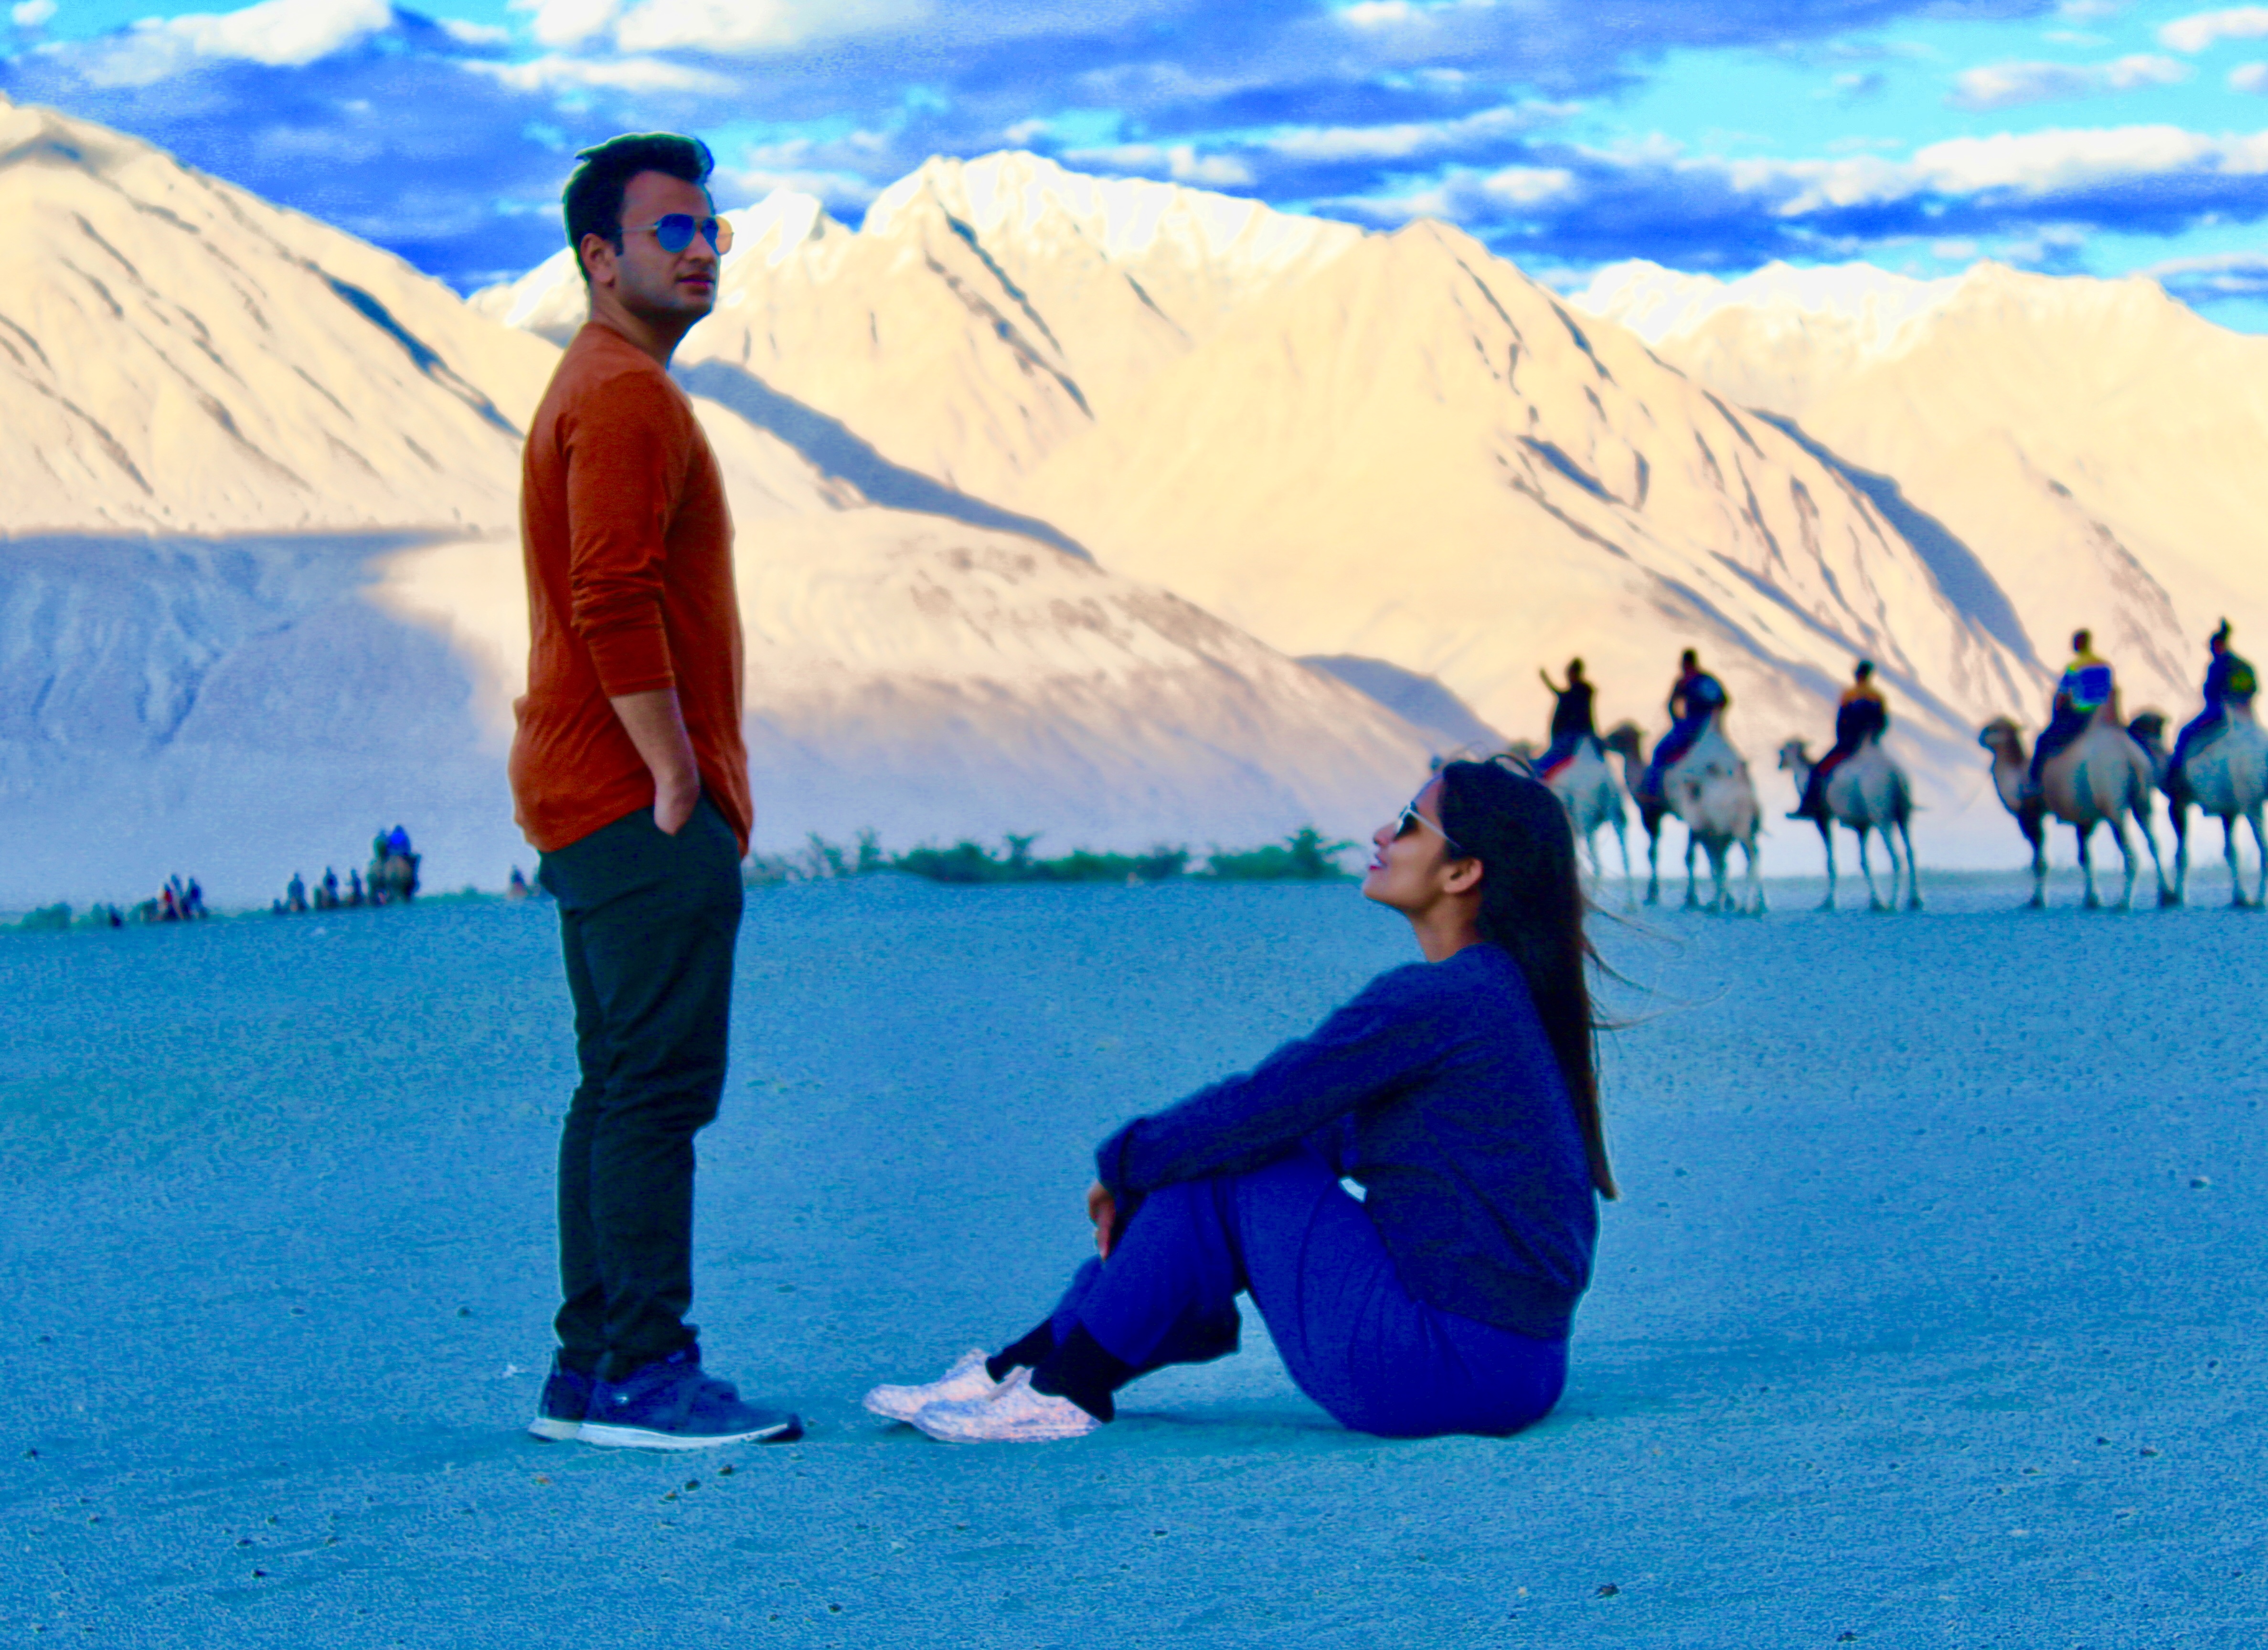 Travel guide to Nubra valley and Pangong Tso in Ladakh - 2itchyfeets